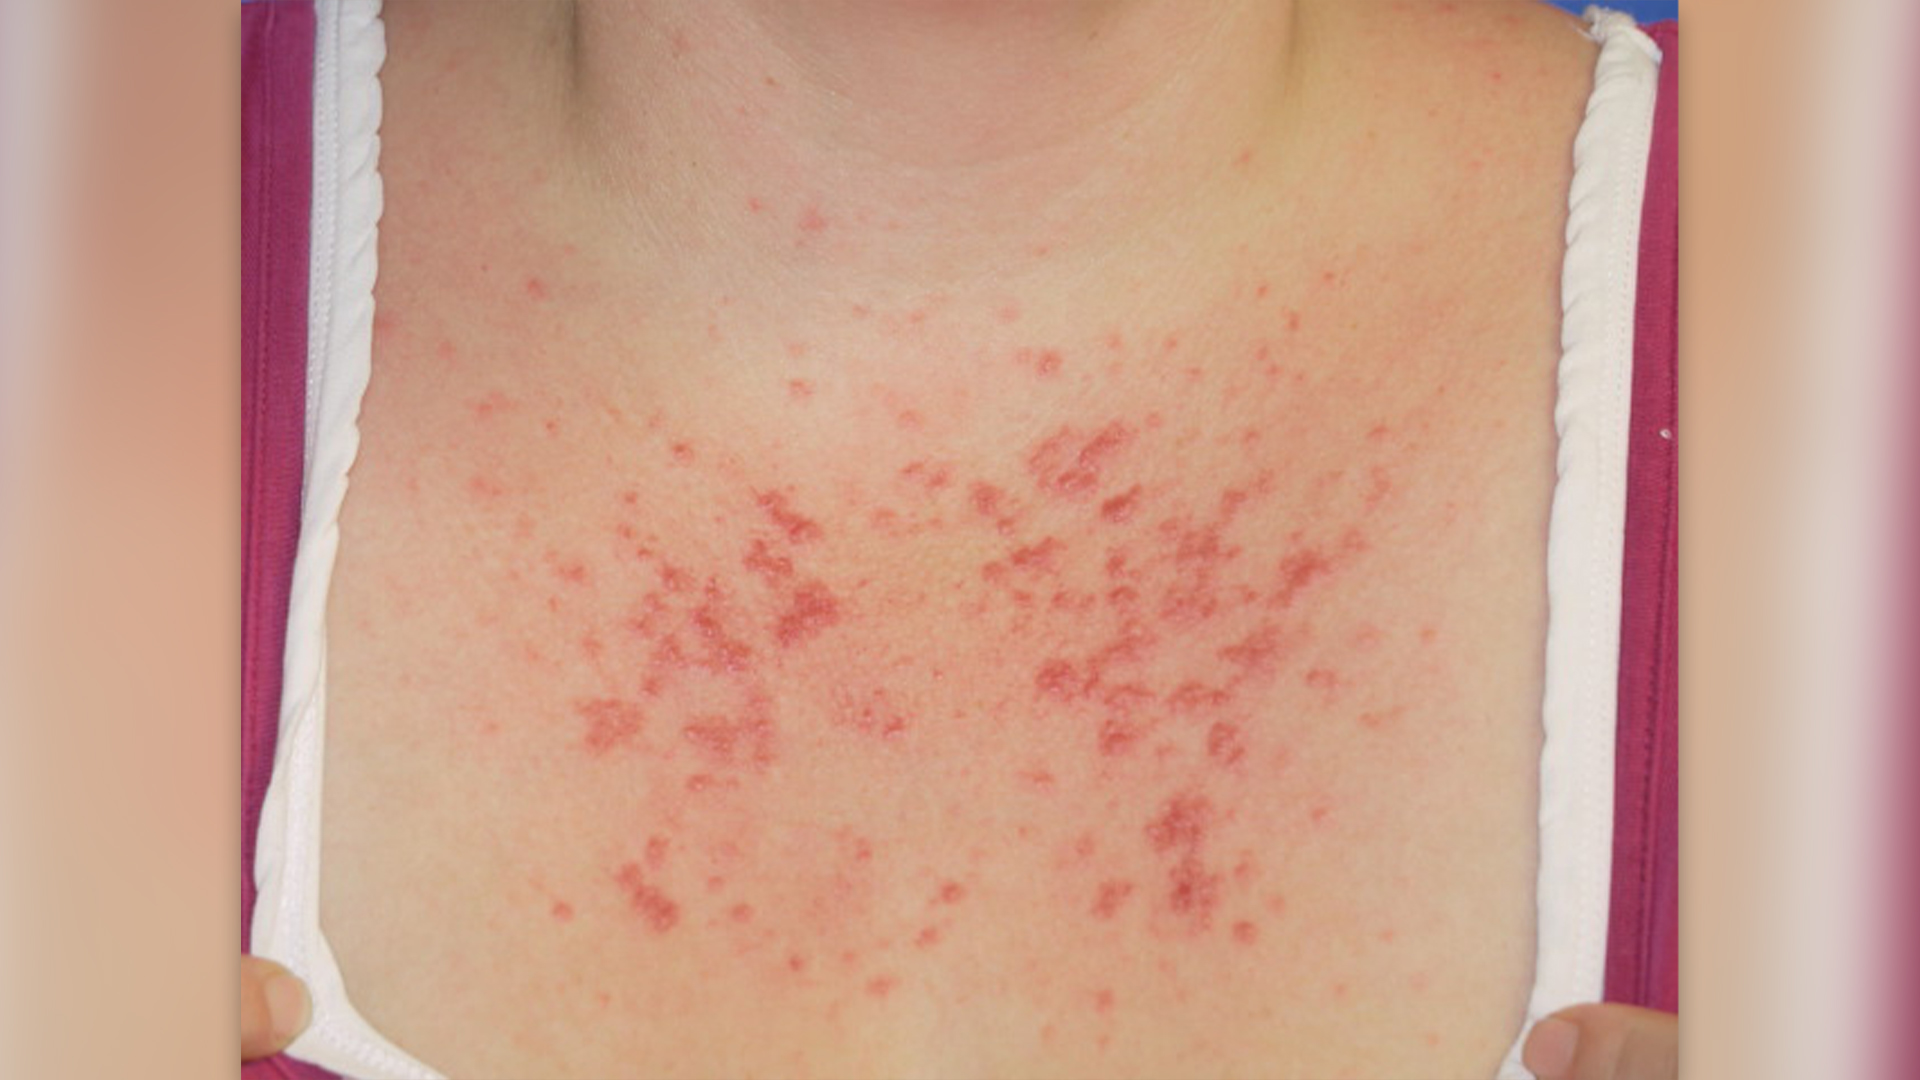 photo shows a close up of a woman's upper chest with a red, bumpy rash